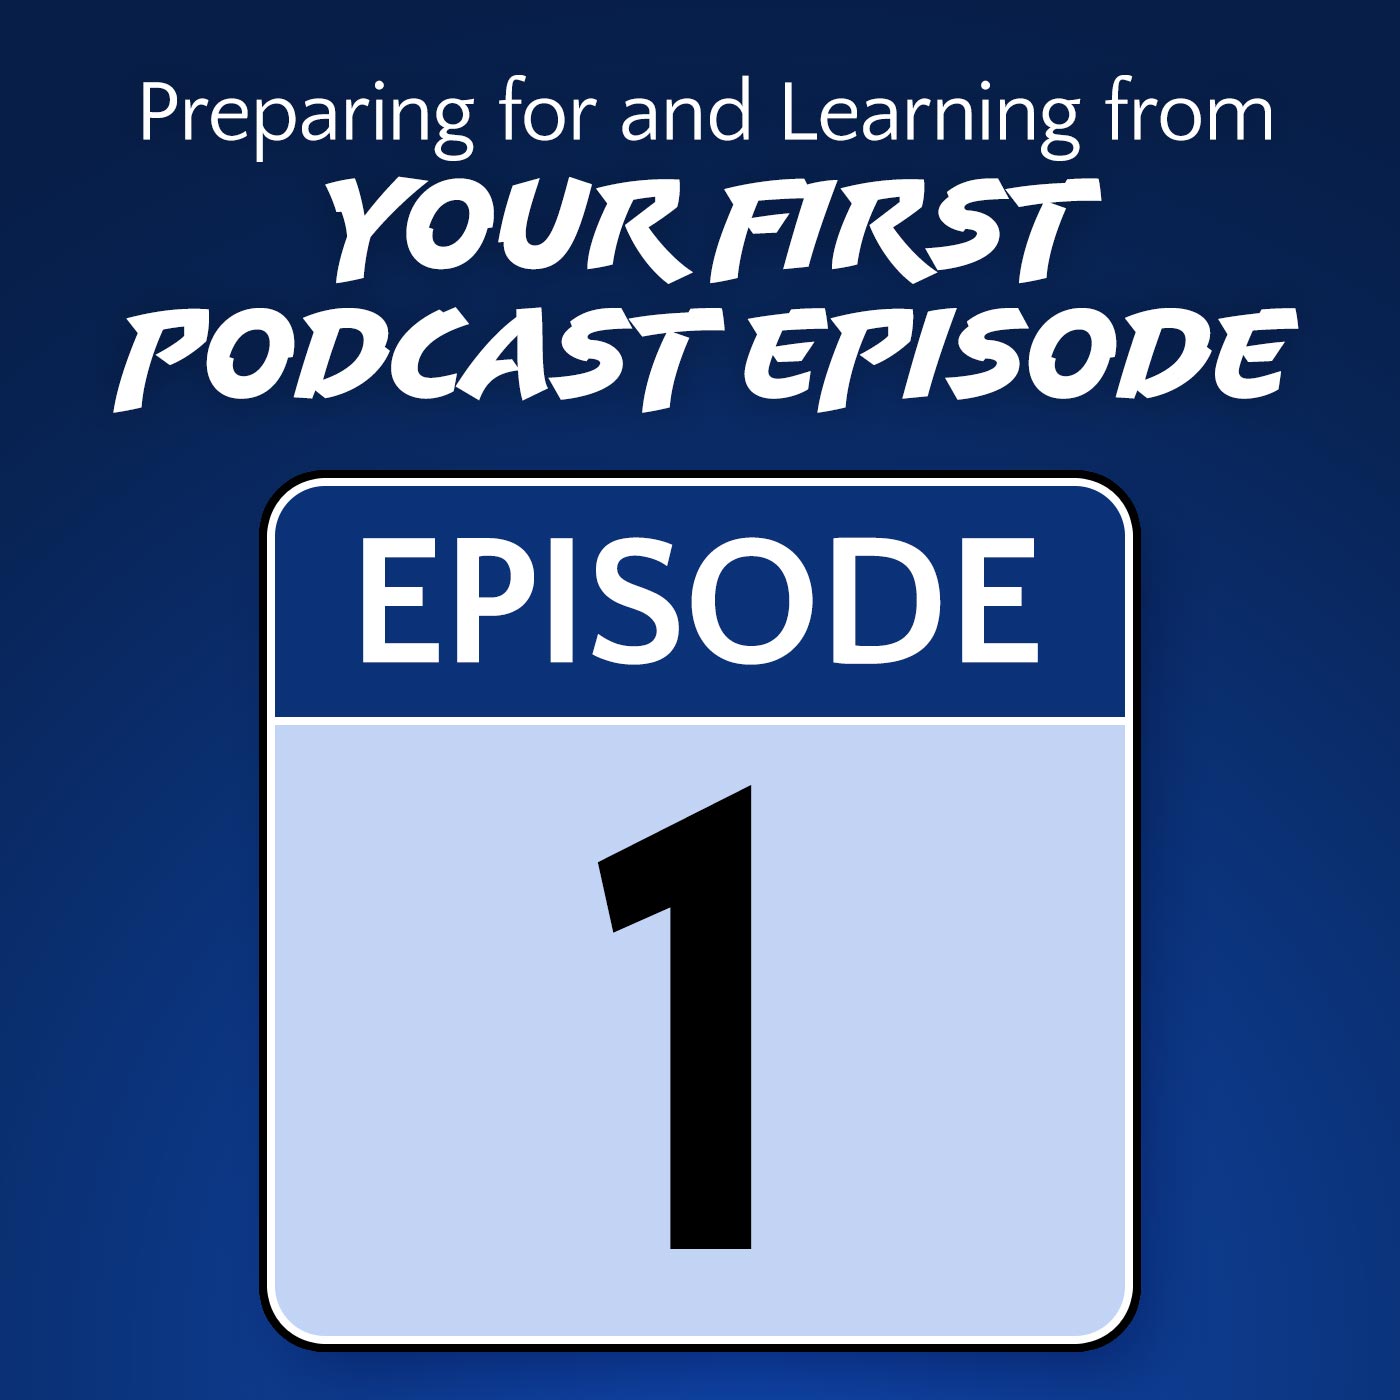 Preparing for and Learning from Your First Podcast Episode